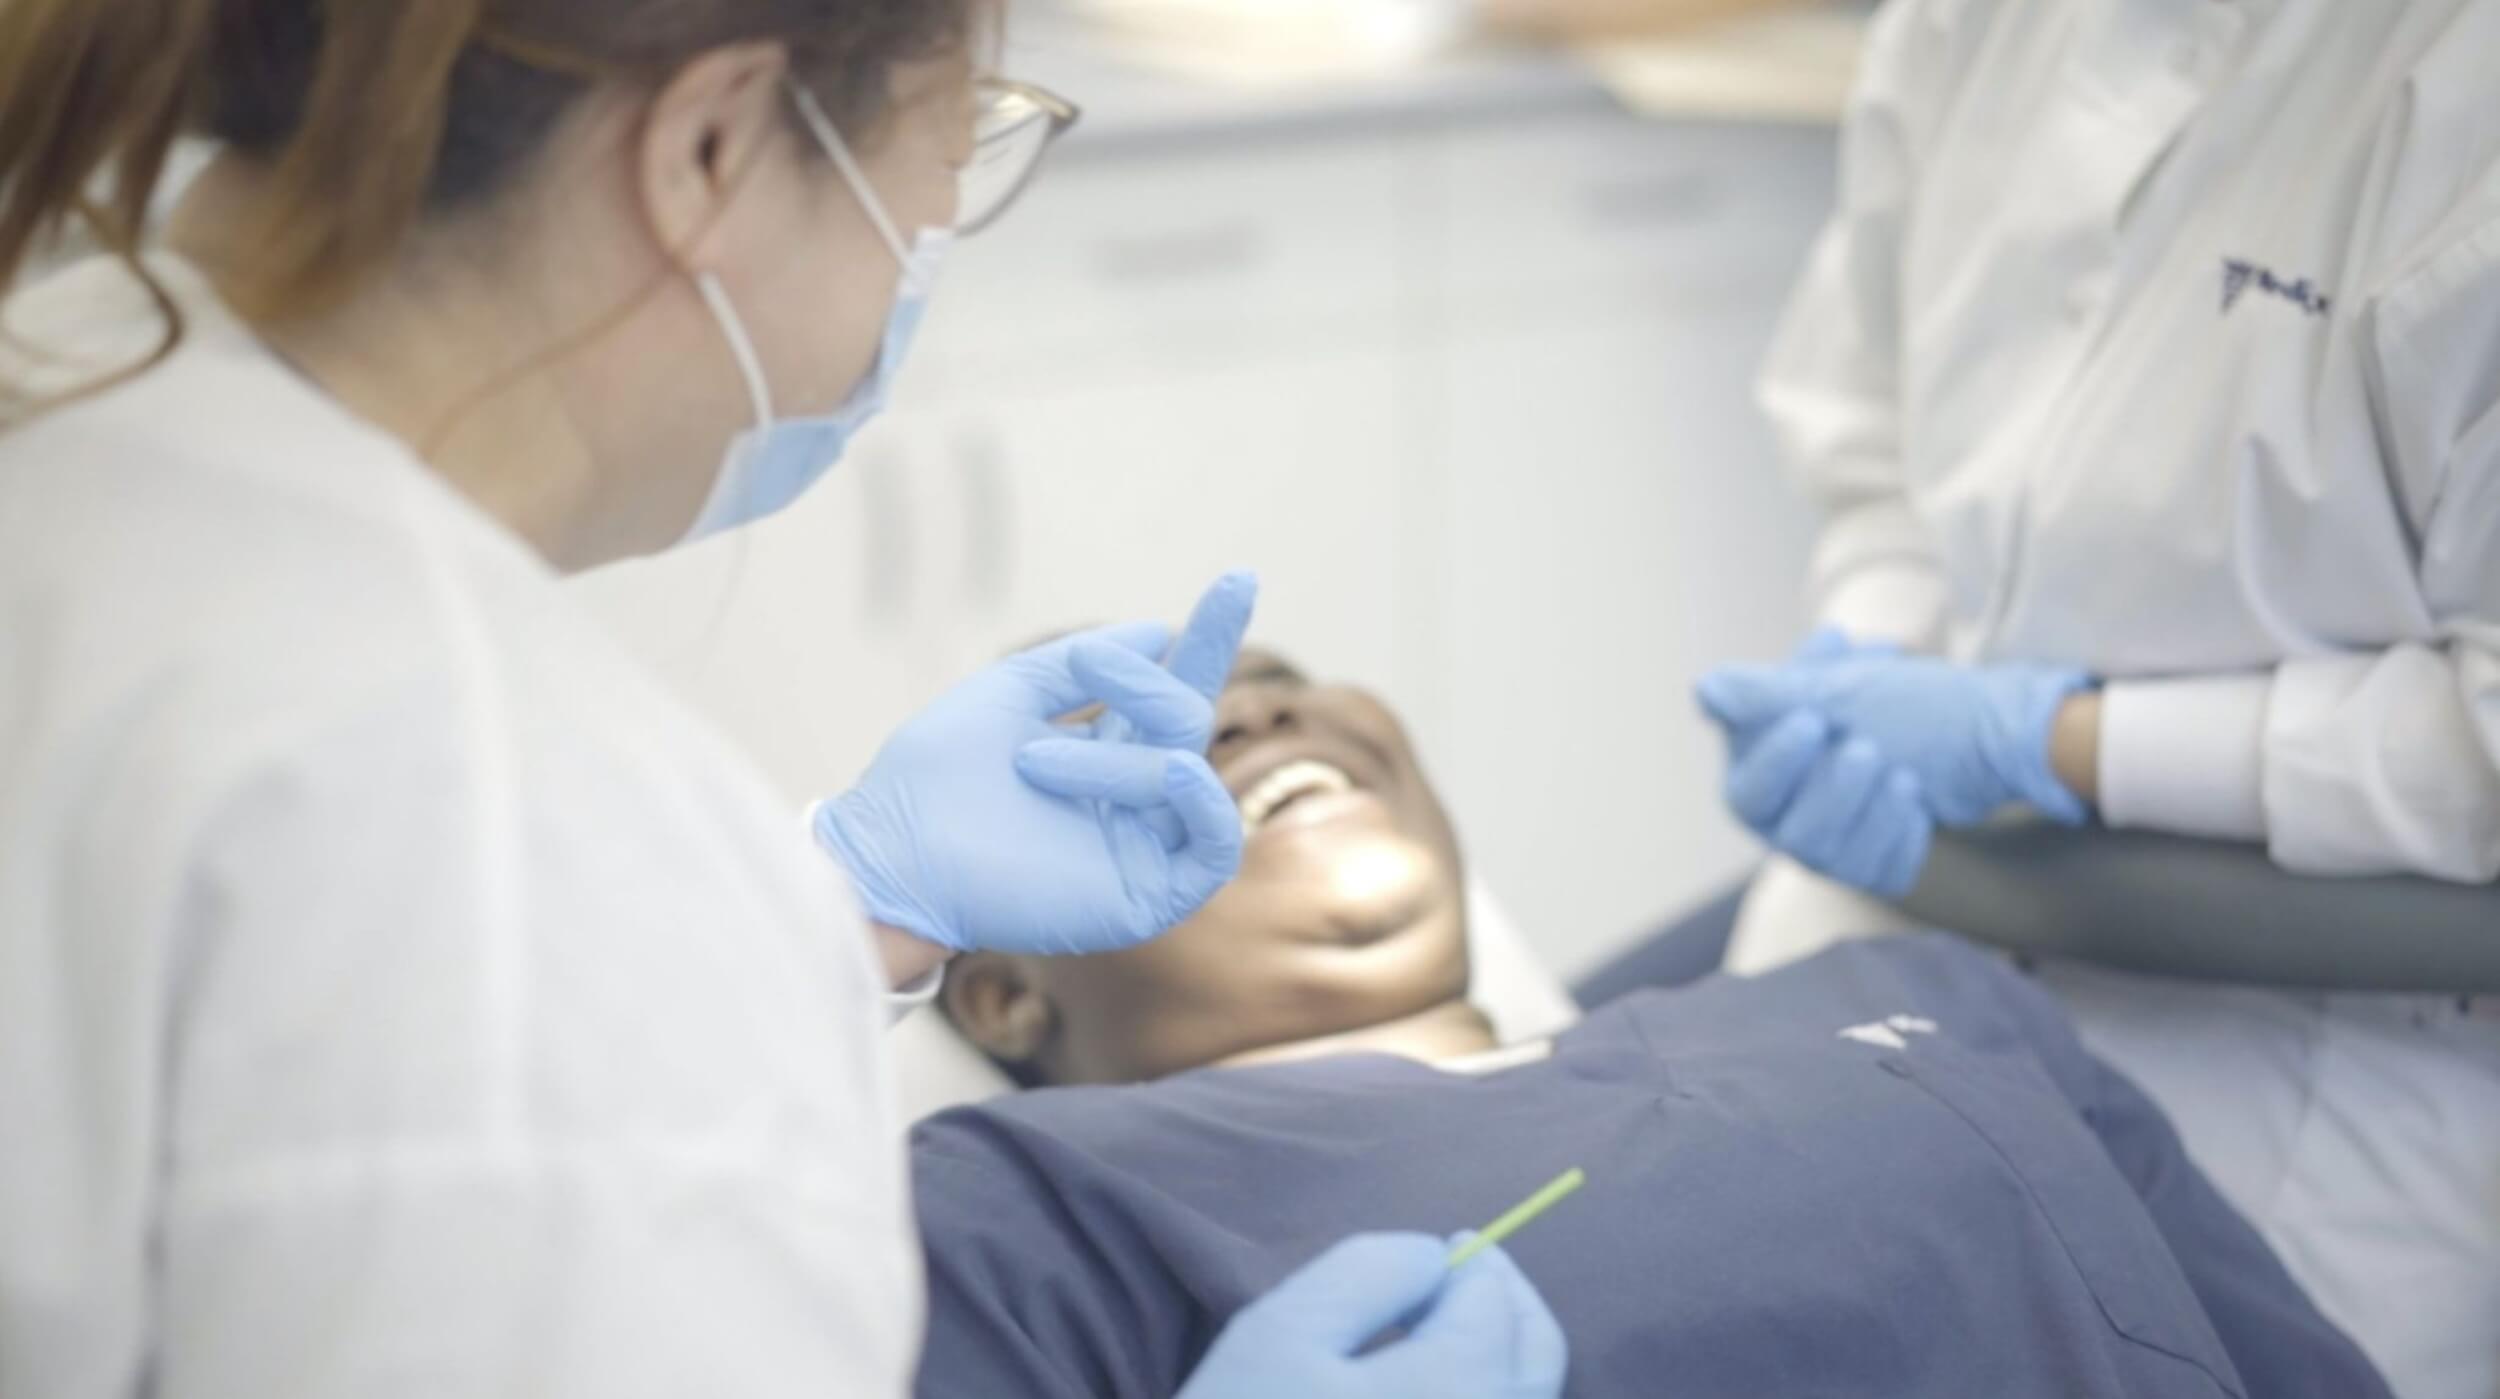 A student completing a dental assistant program in Toronto working on a patient